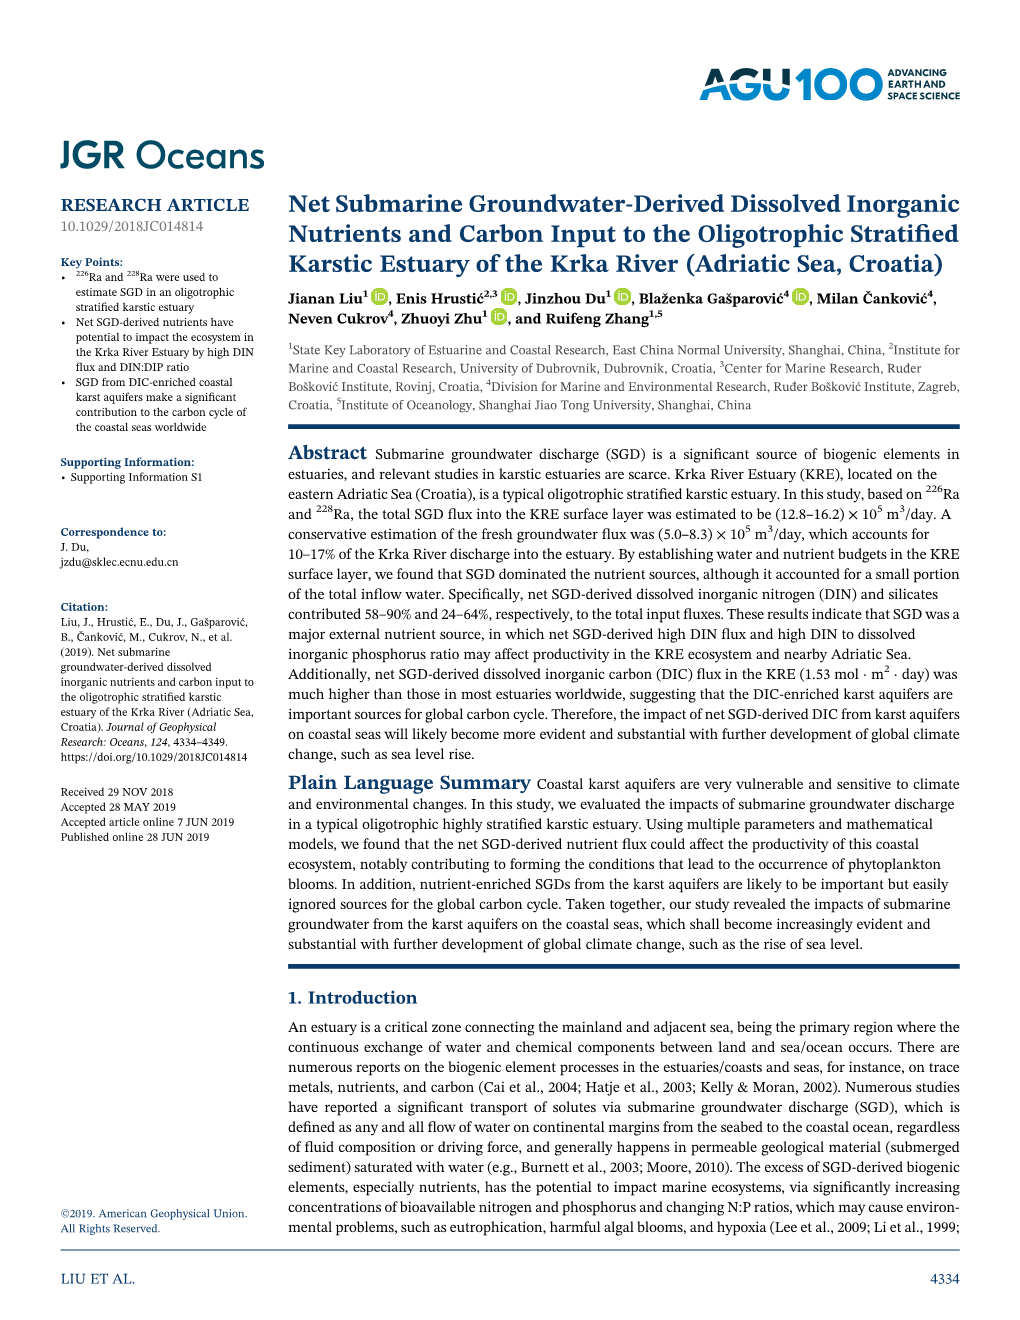 Net Submarine Groundwater-Derived Dissolved Inorganic Nutrients And